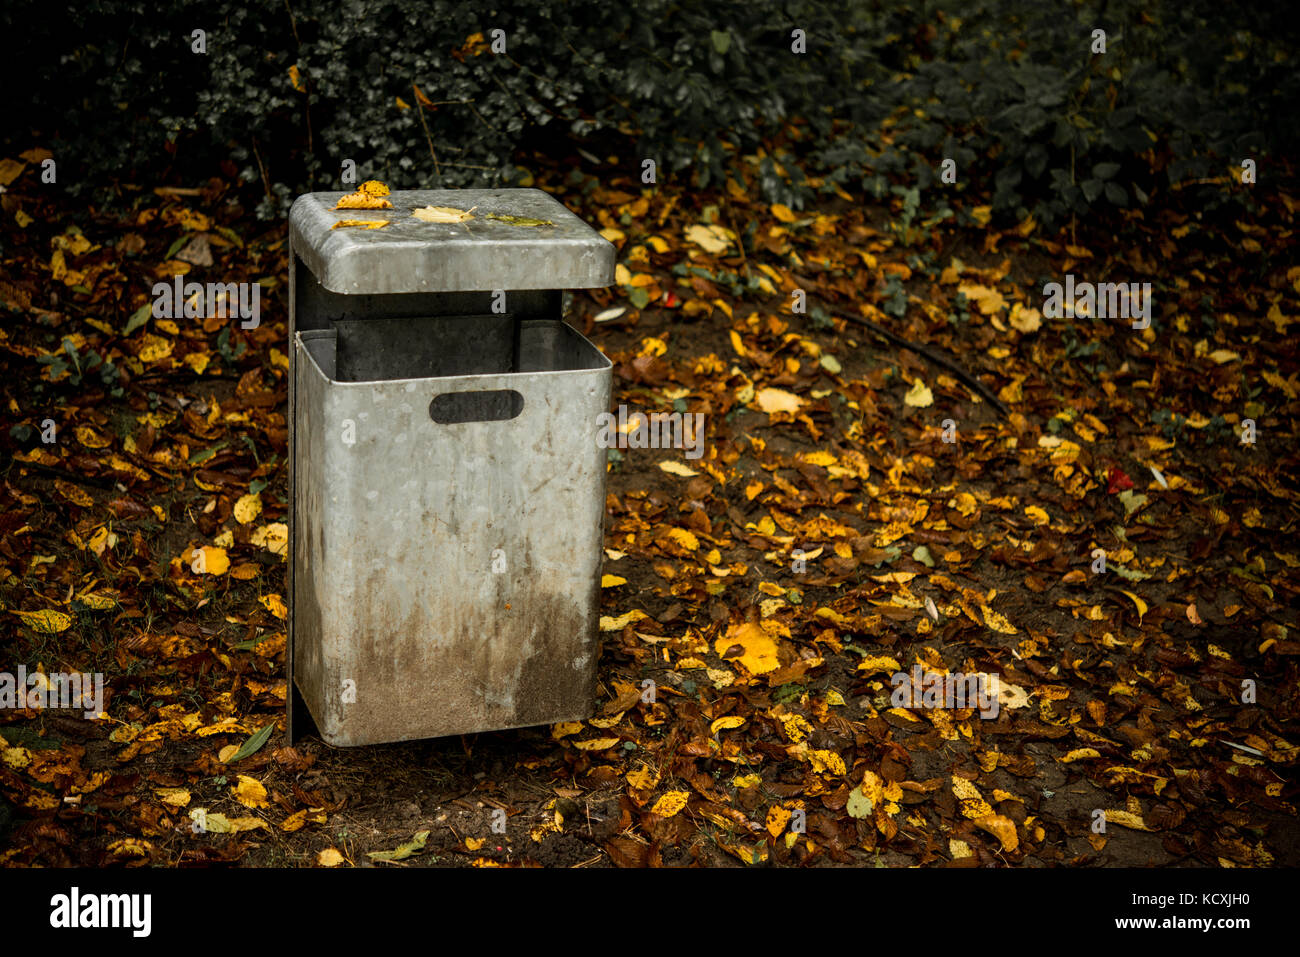 dust bin trash in autumn with leaves Stock Photo